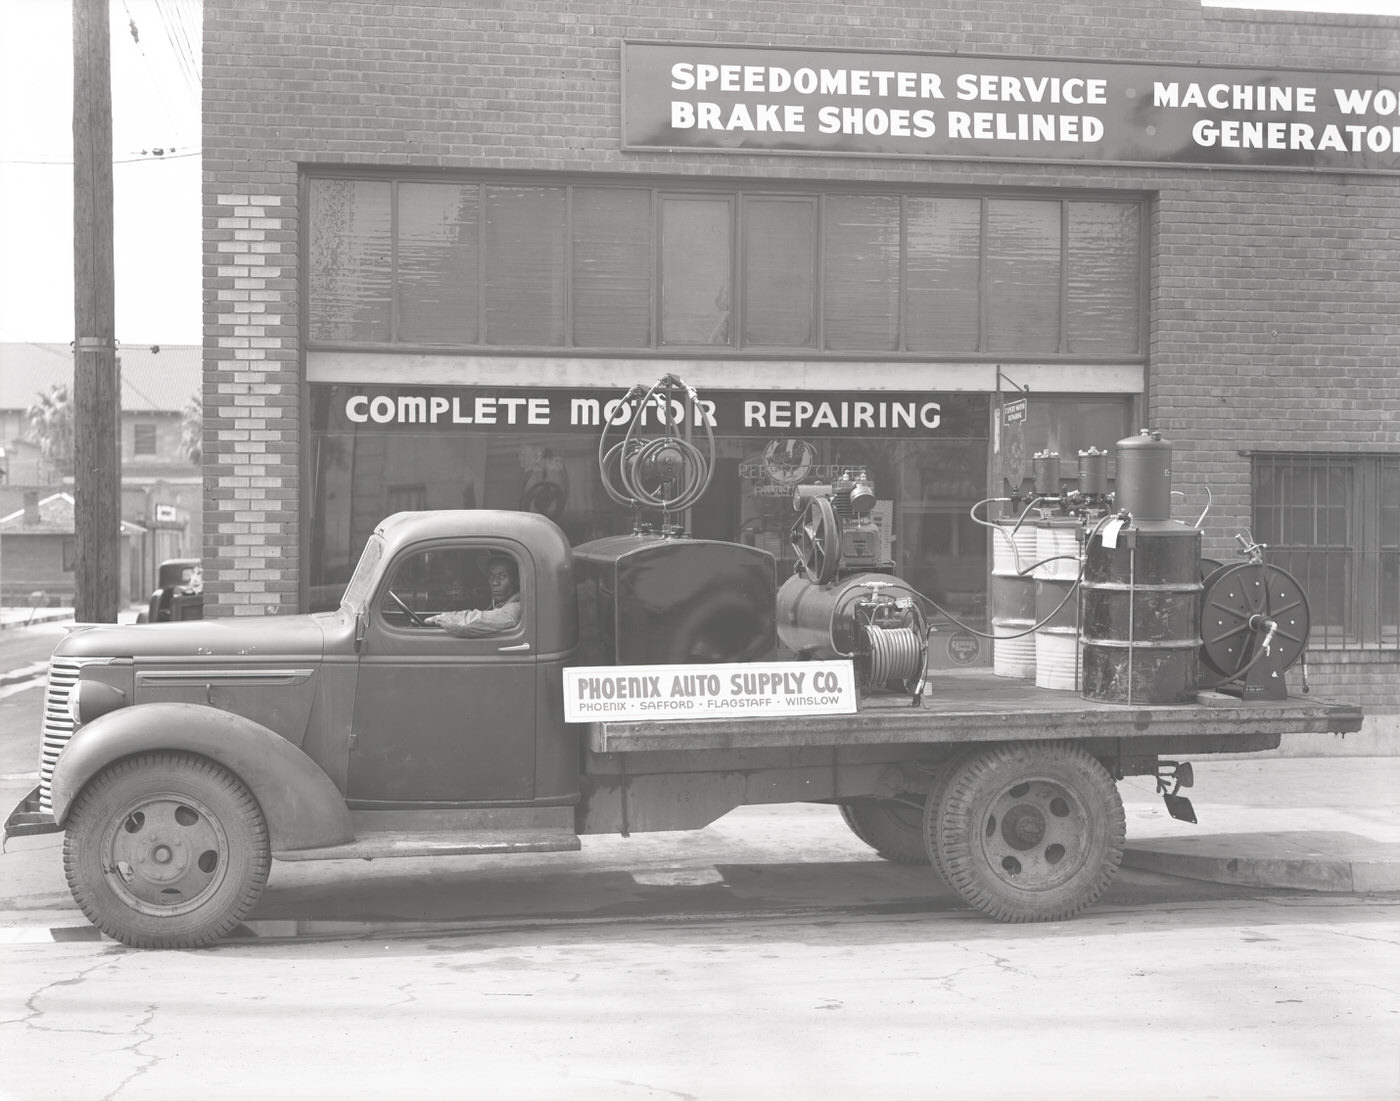 Phoenix Auto Supply Co. Truck and Building, 1941